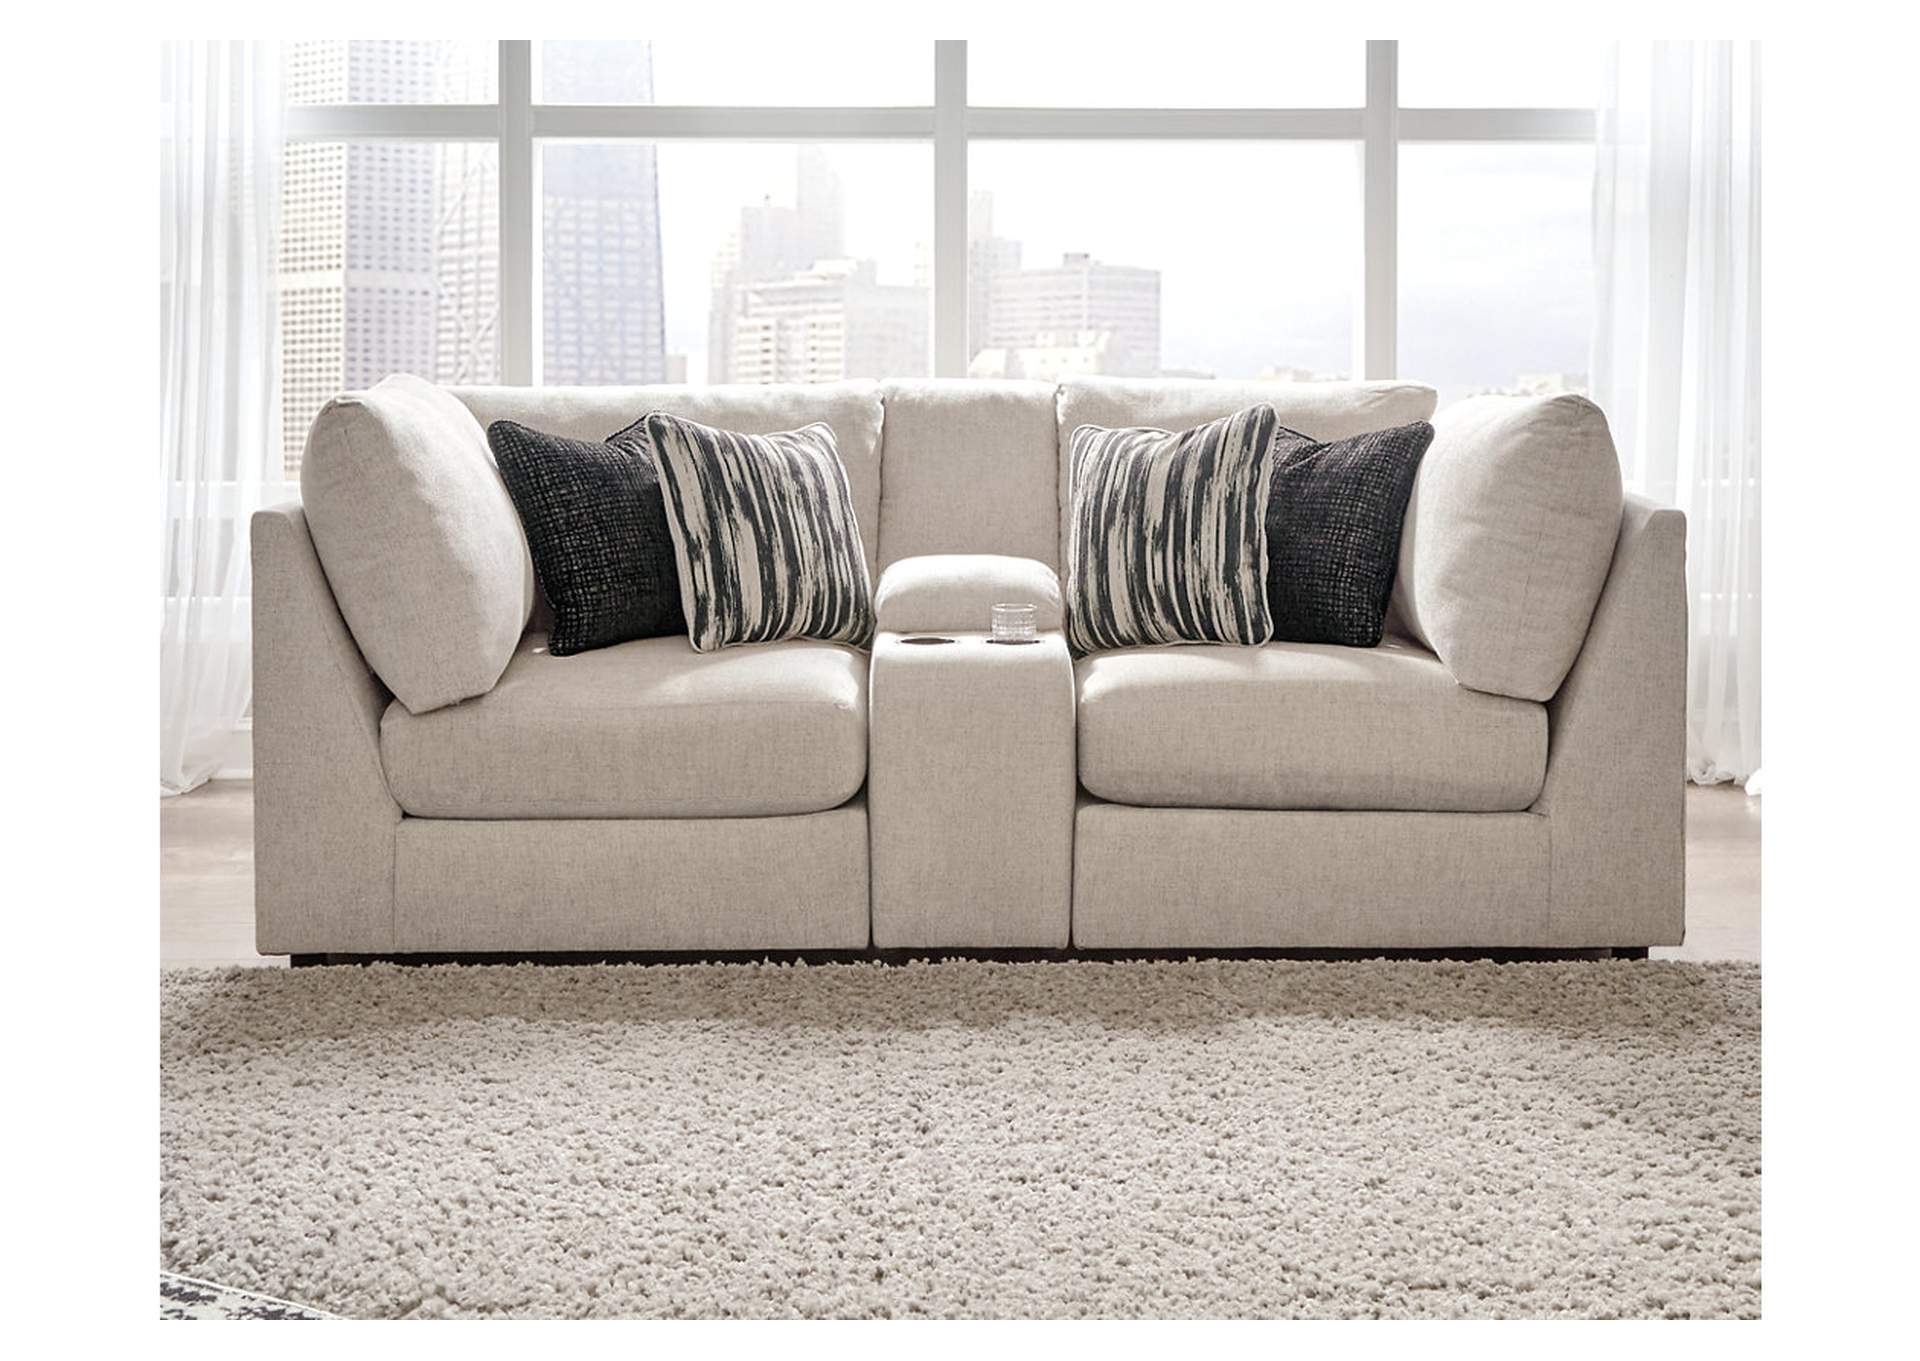 Kellway 3-Piece Sectional,Signature Design By Ashley